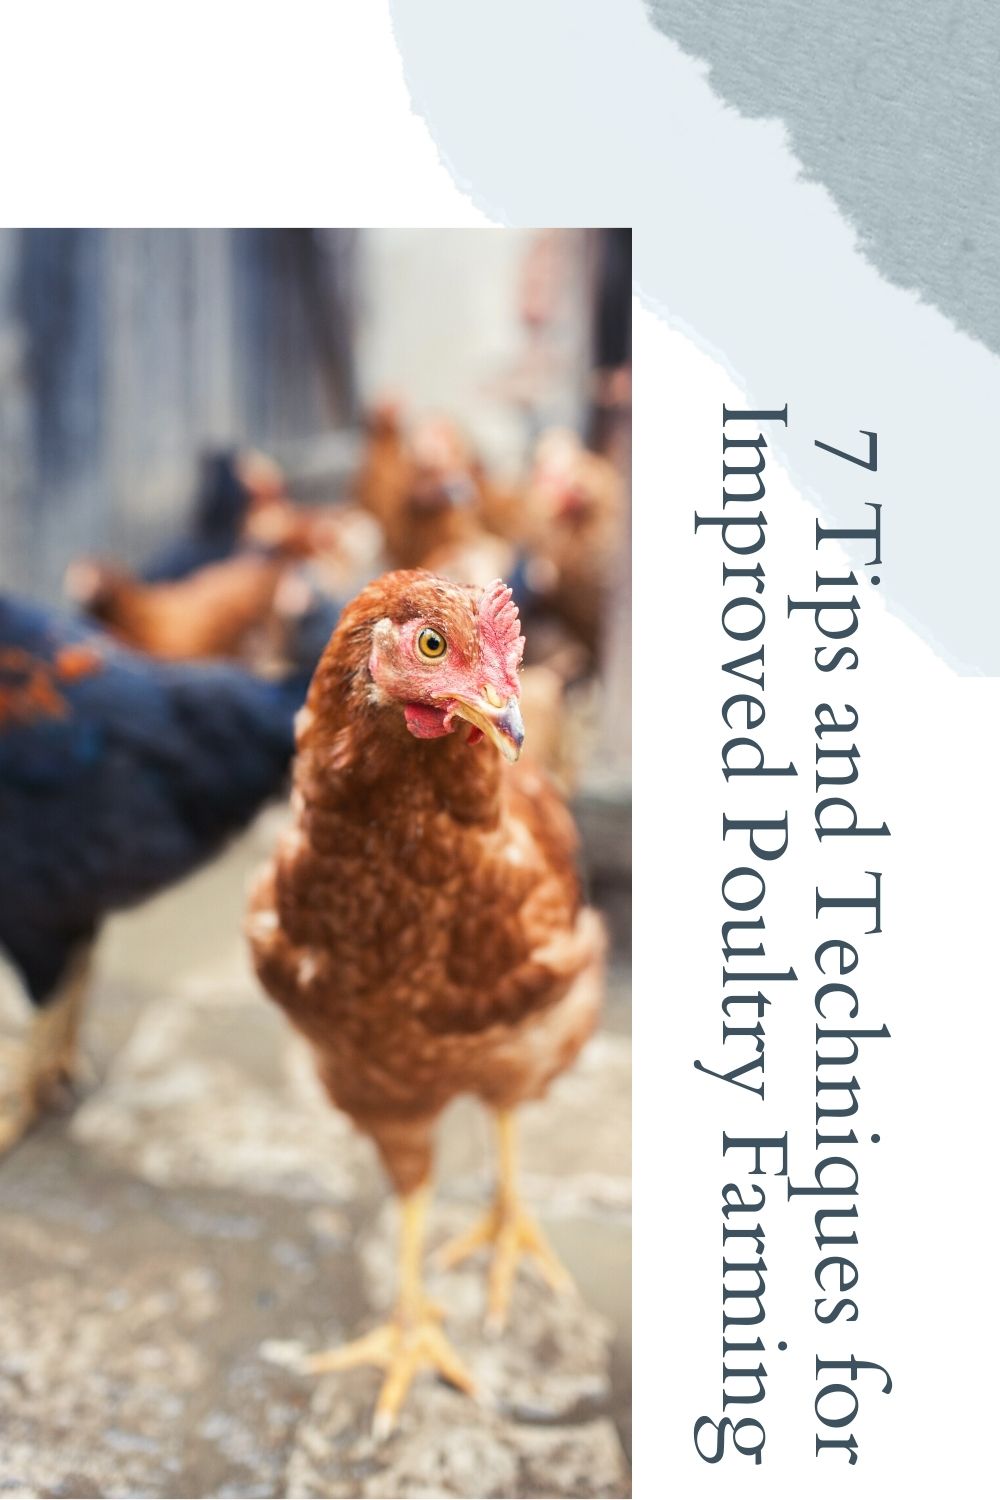 7 Tips and Techniques for Improved Poultry Farming